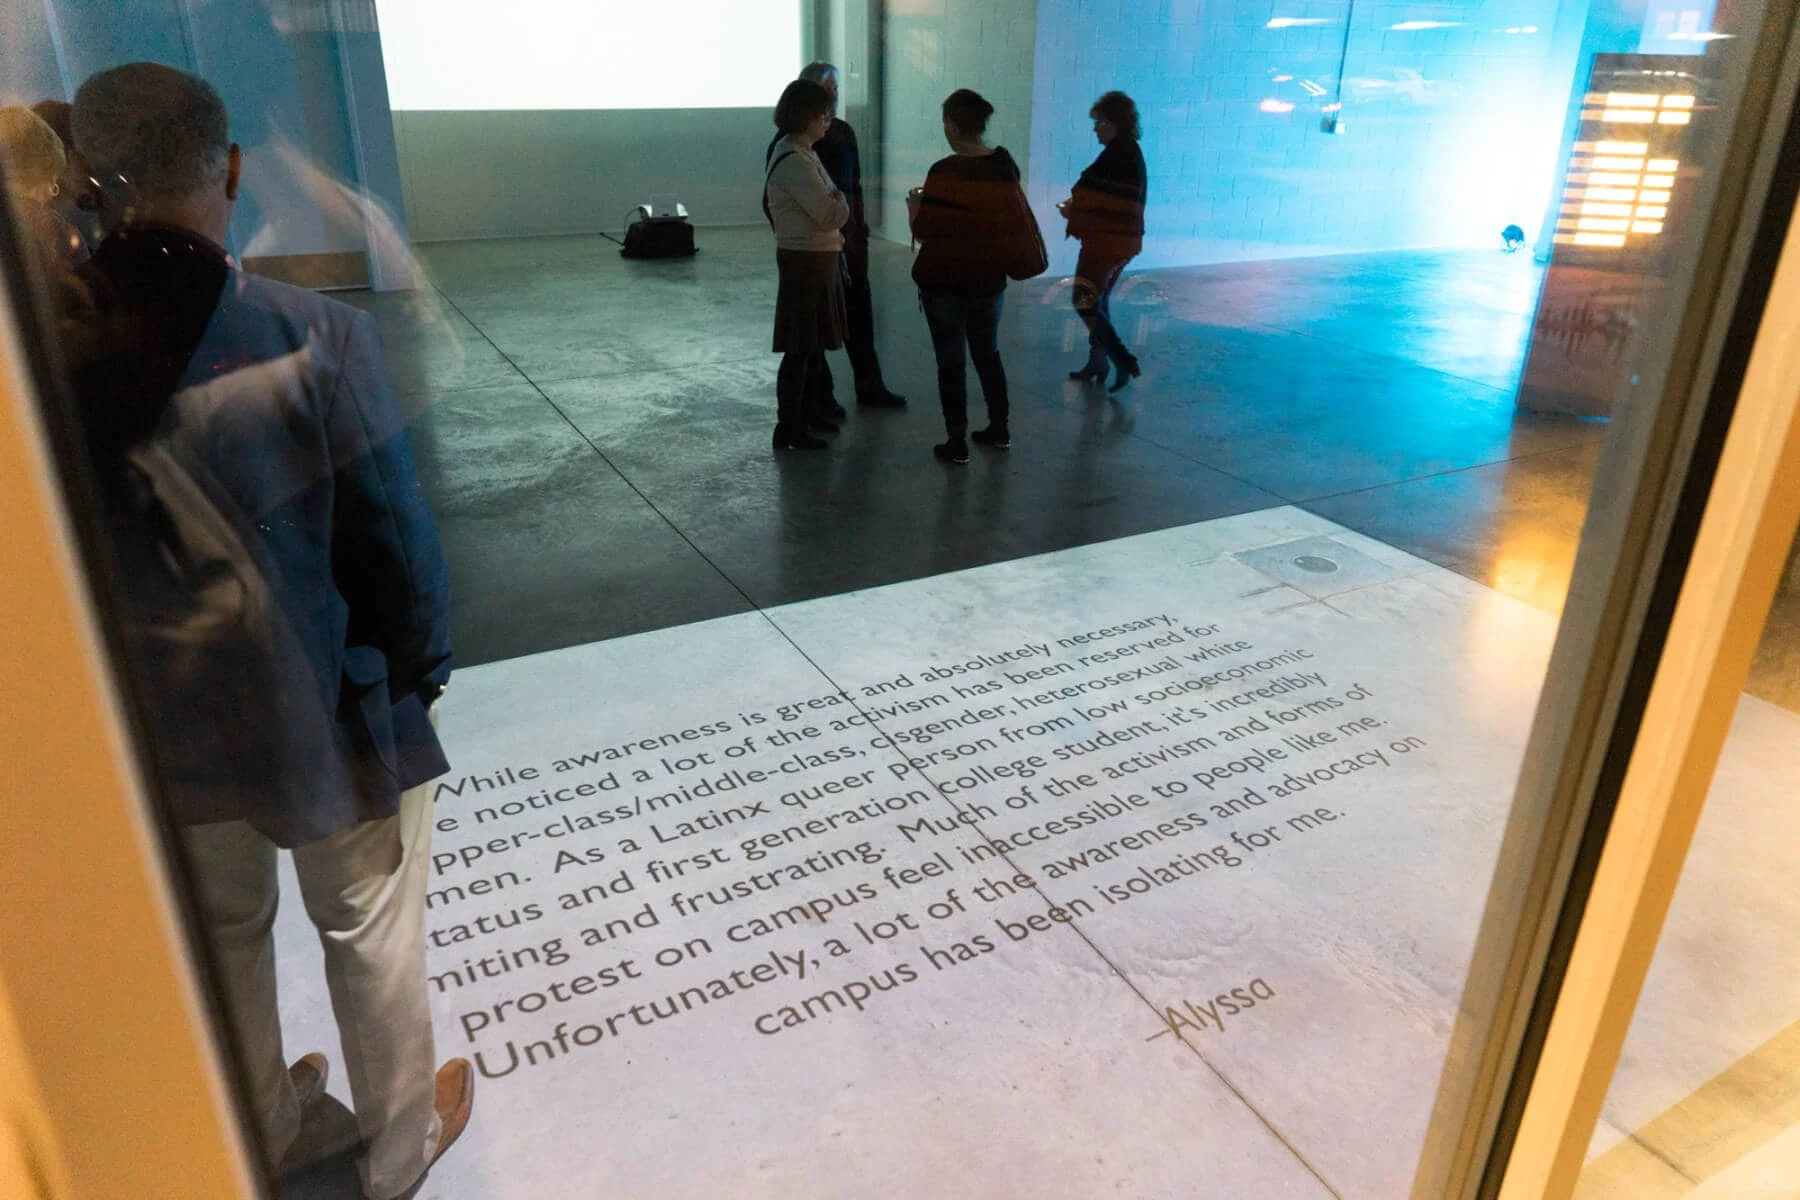 A survivor statement that is projected on the floor of the Broad Art Lab in downtown East Lansing